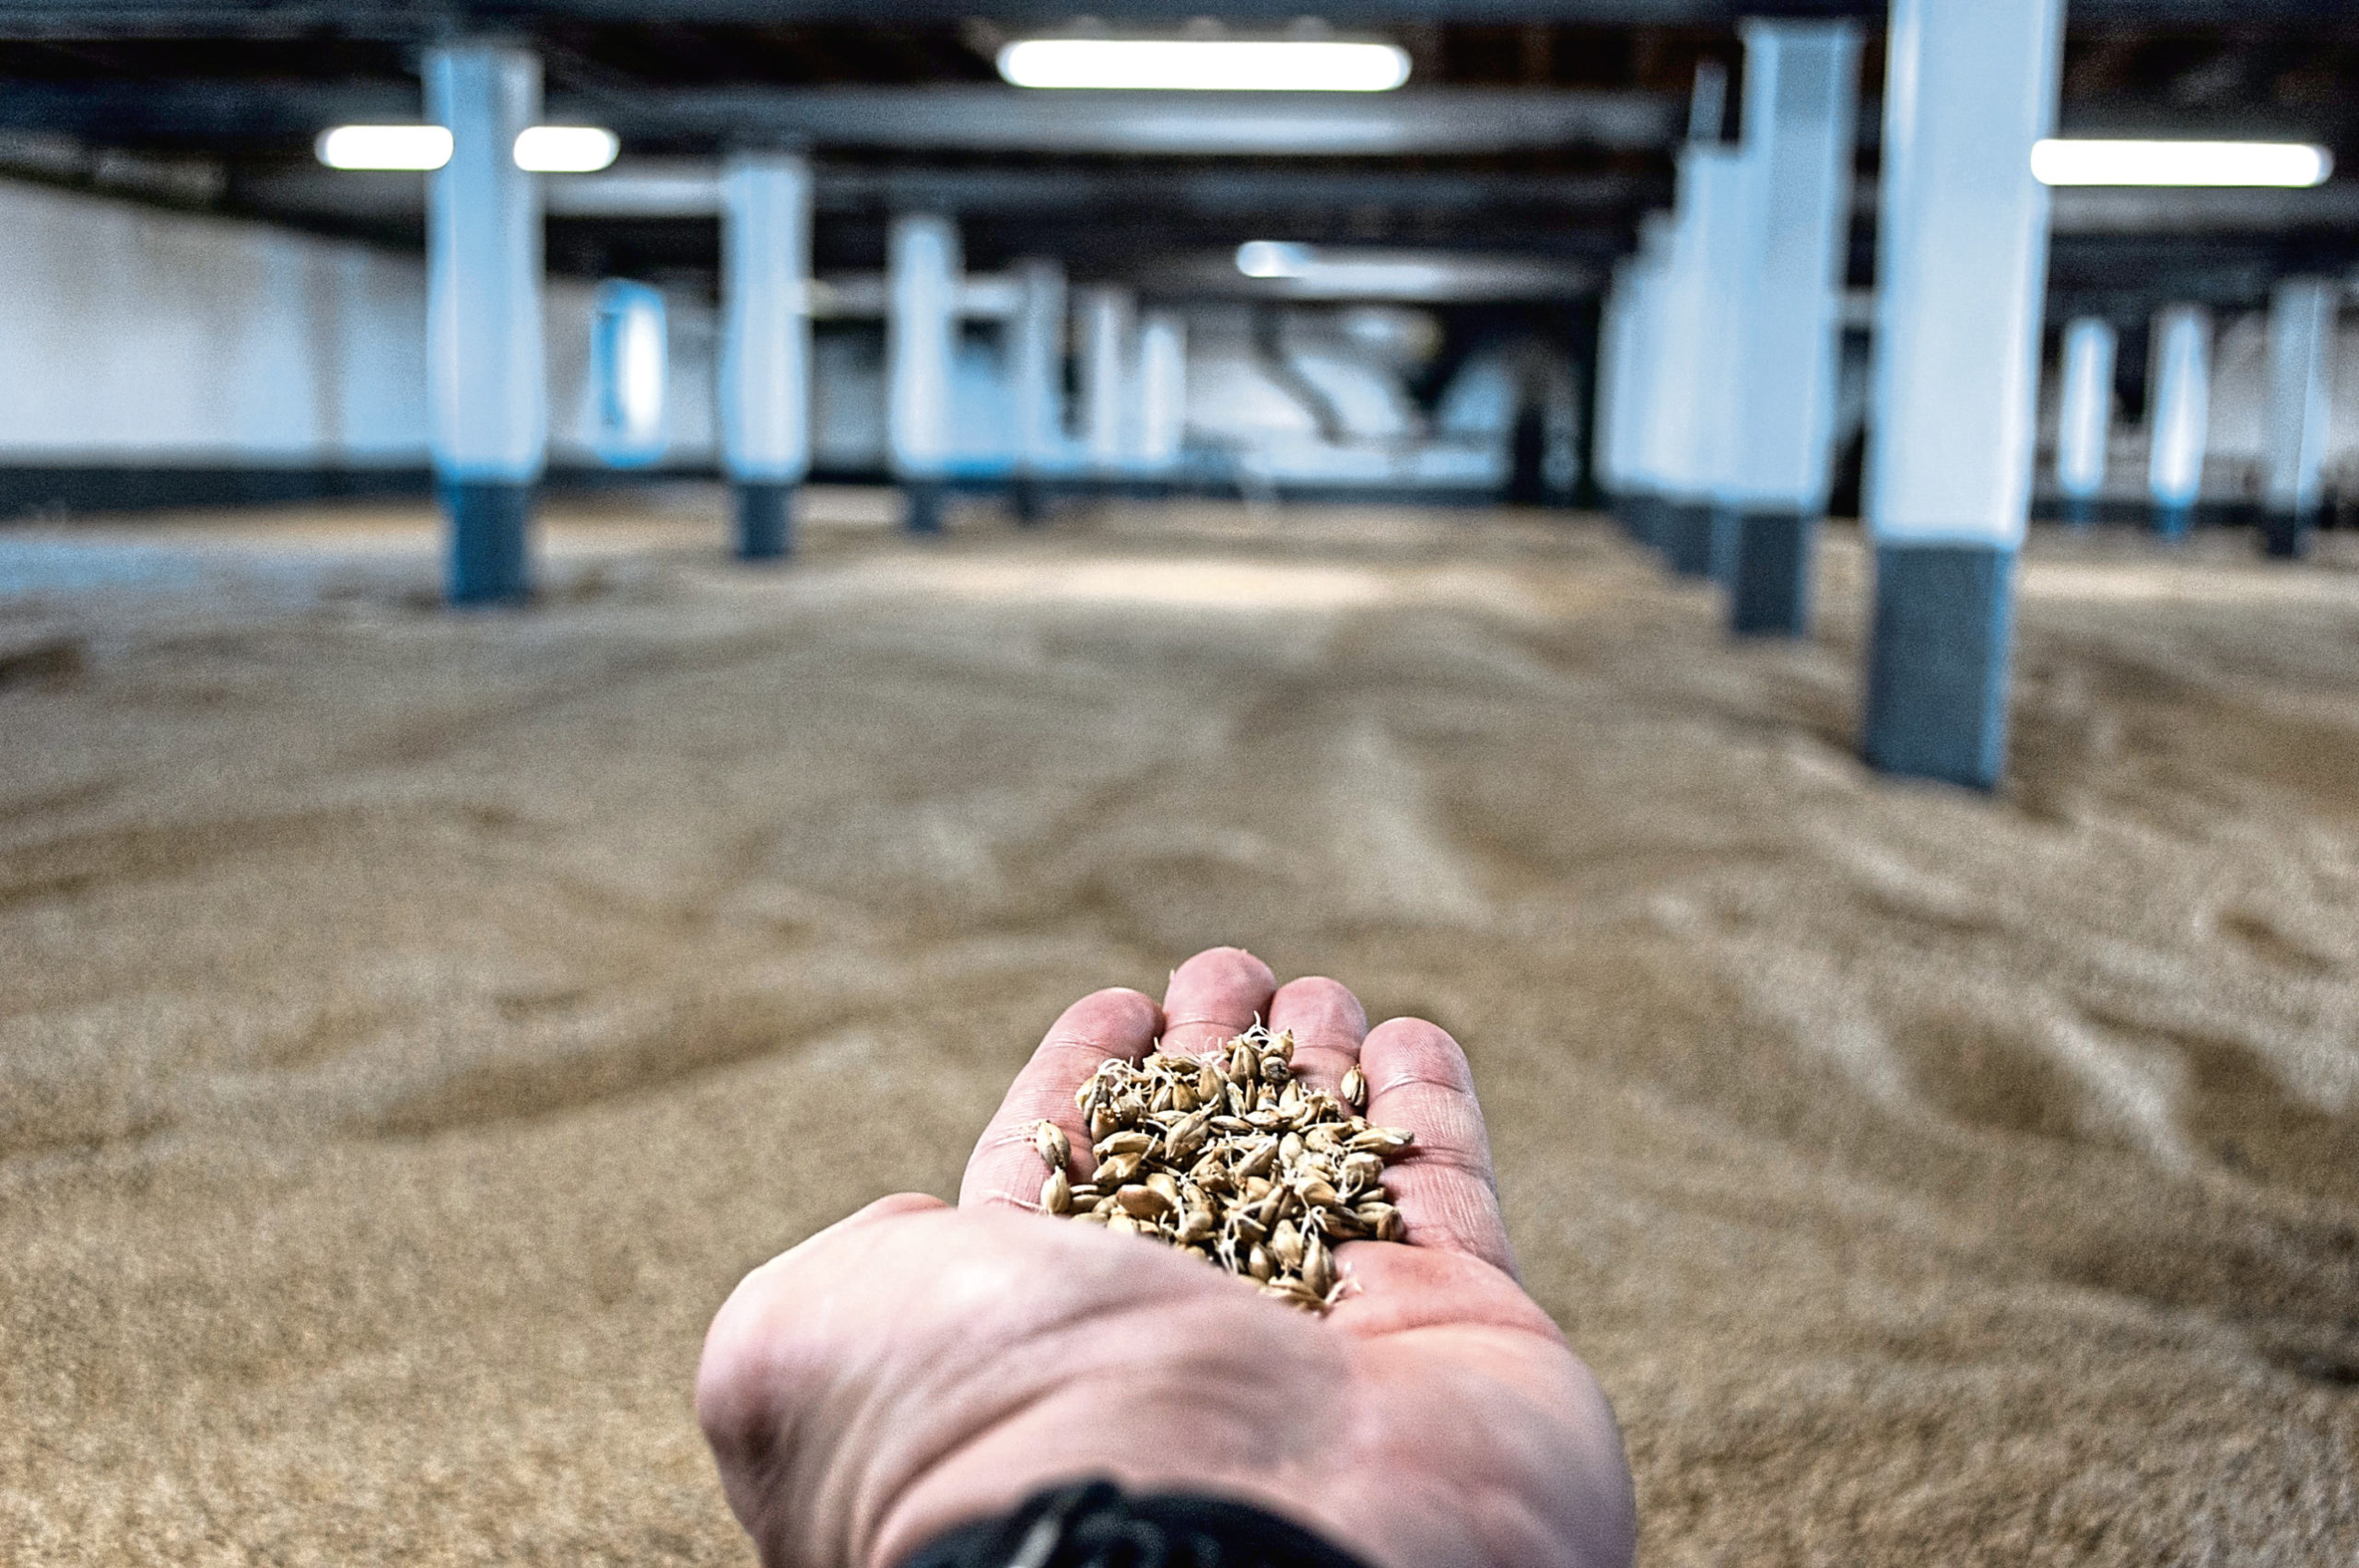 The Scotch whisky industry is not operating as normal, impacting demand for grain.